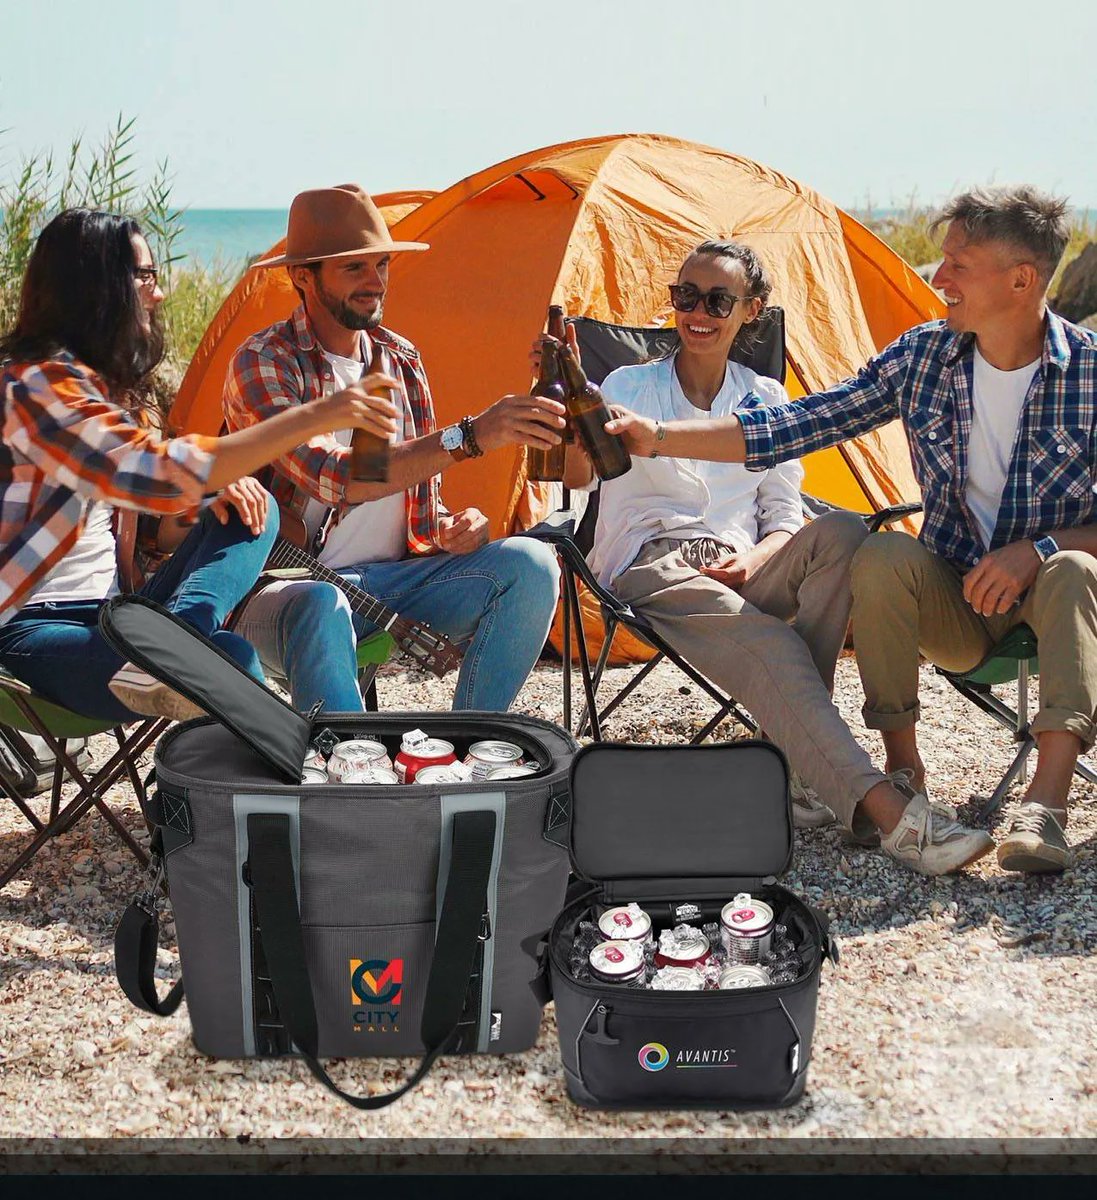 Grab your friends and laugh the day way! Happy National Best Friends Day!
#bestfriend #bffs #coolers #clientgifts #corporategifts #yourlogohere #promotionalproducts #coolpromo #promotionalgifts #Sourcepoint #youronesource